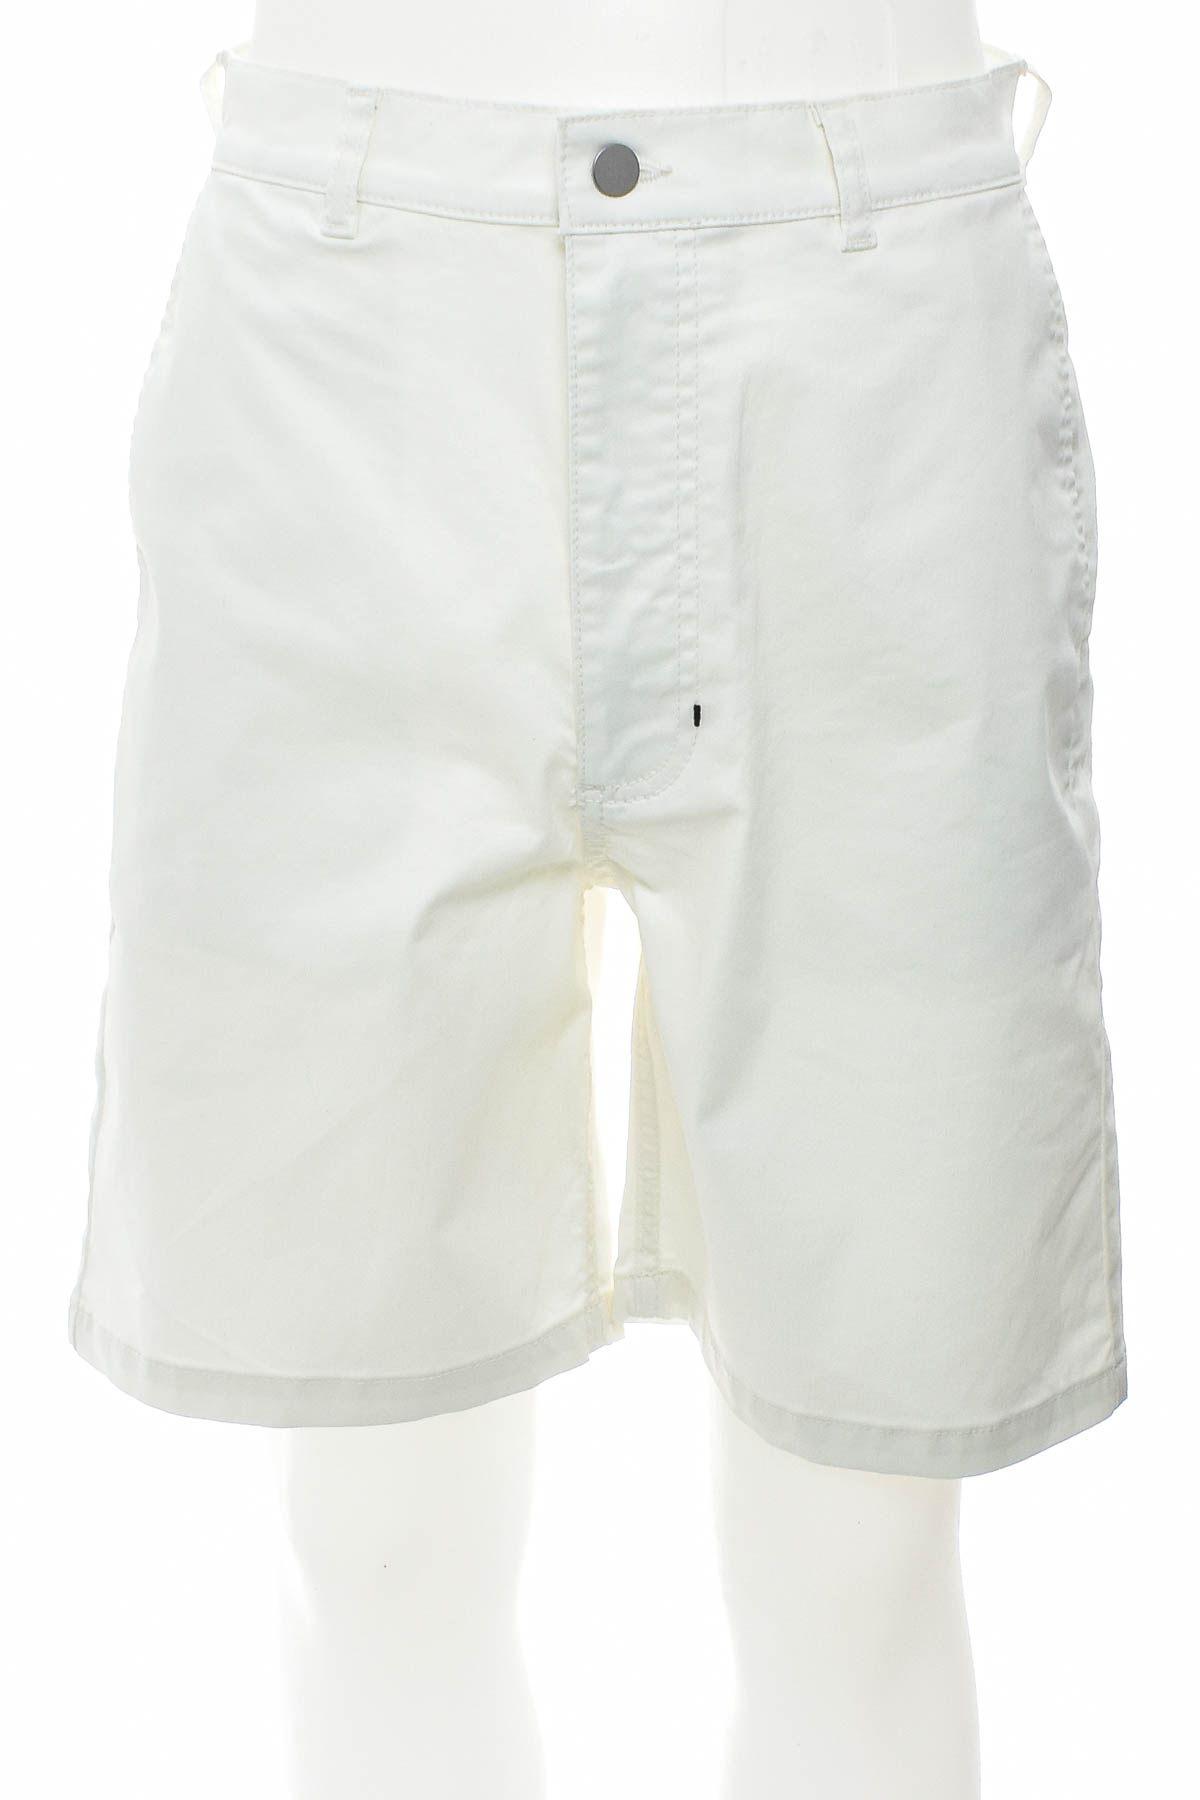 Men's shorts - Marcus Butler for NU-IN - 0